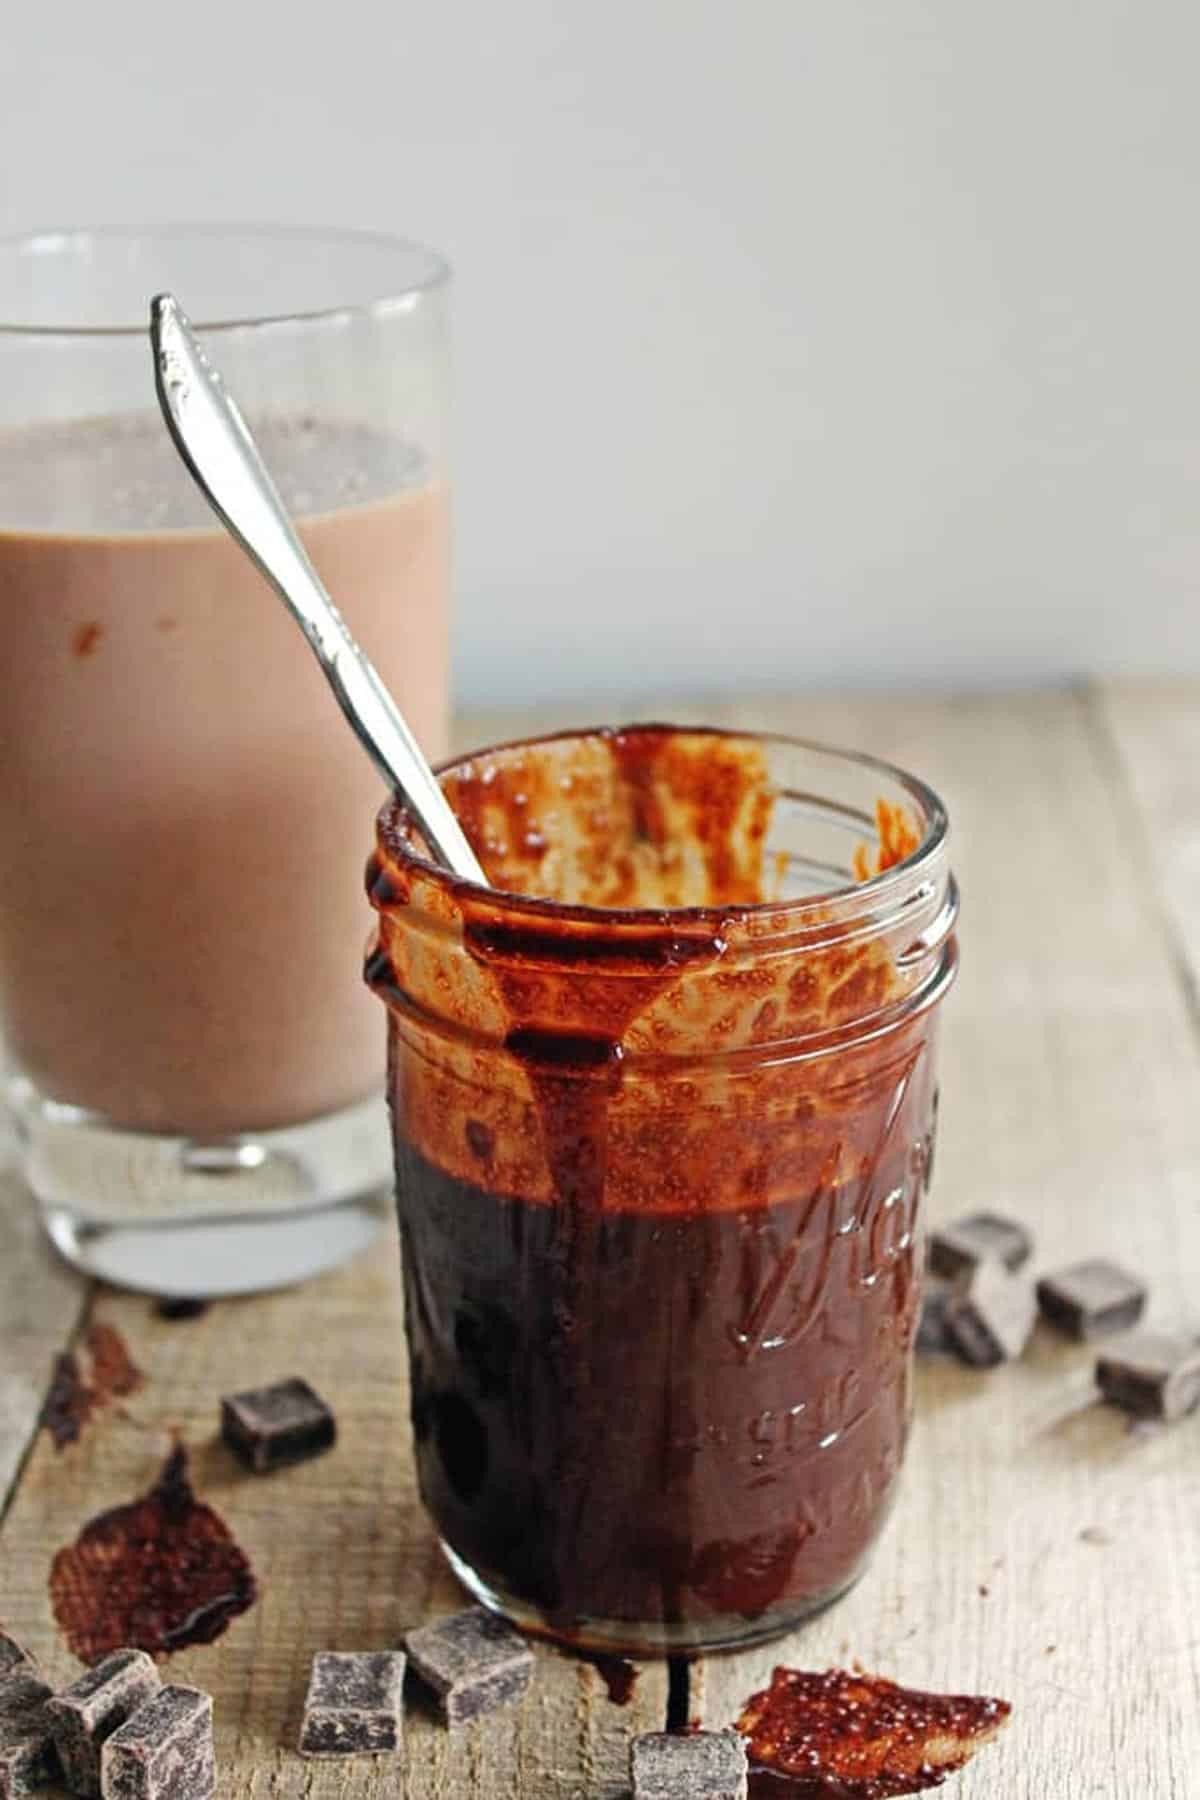 A photo of chocolate peanut butter sauce in a glass jar spilling over the sides.